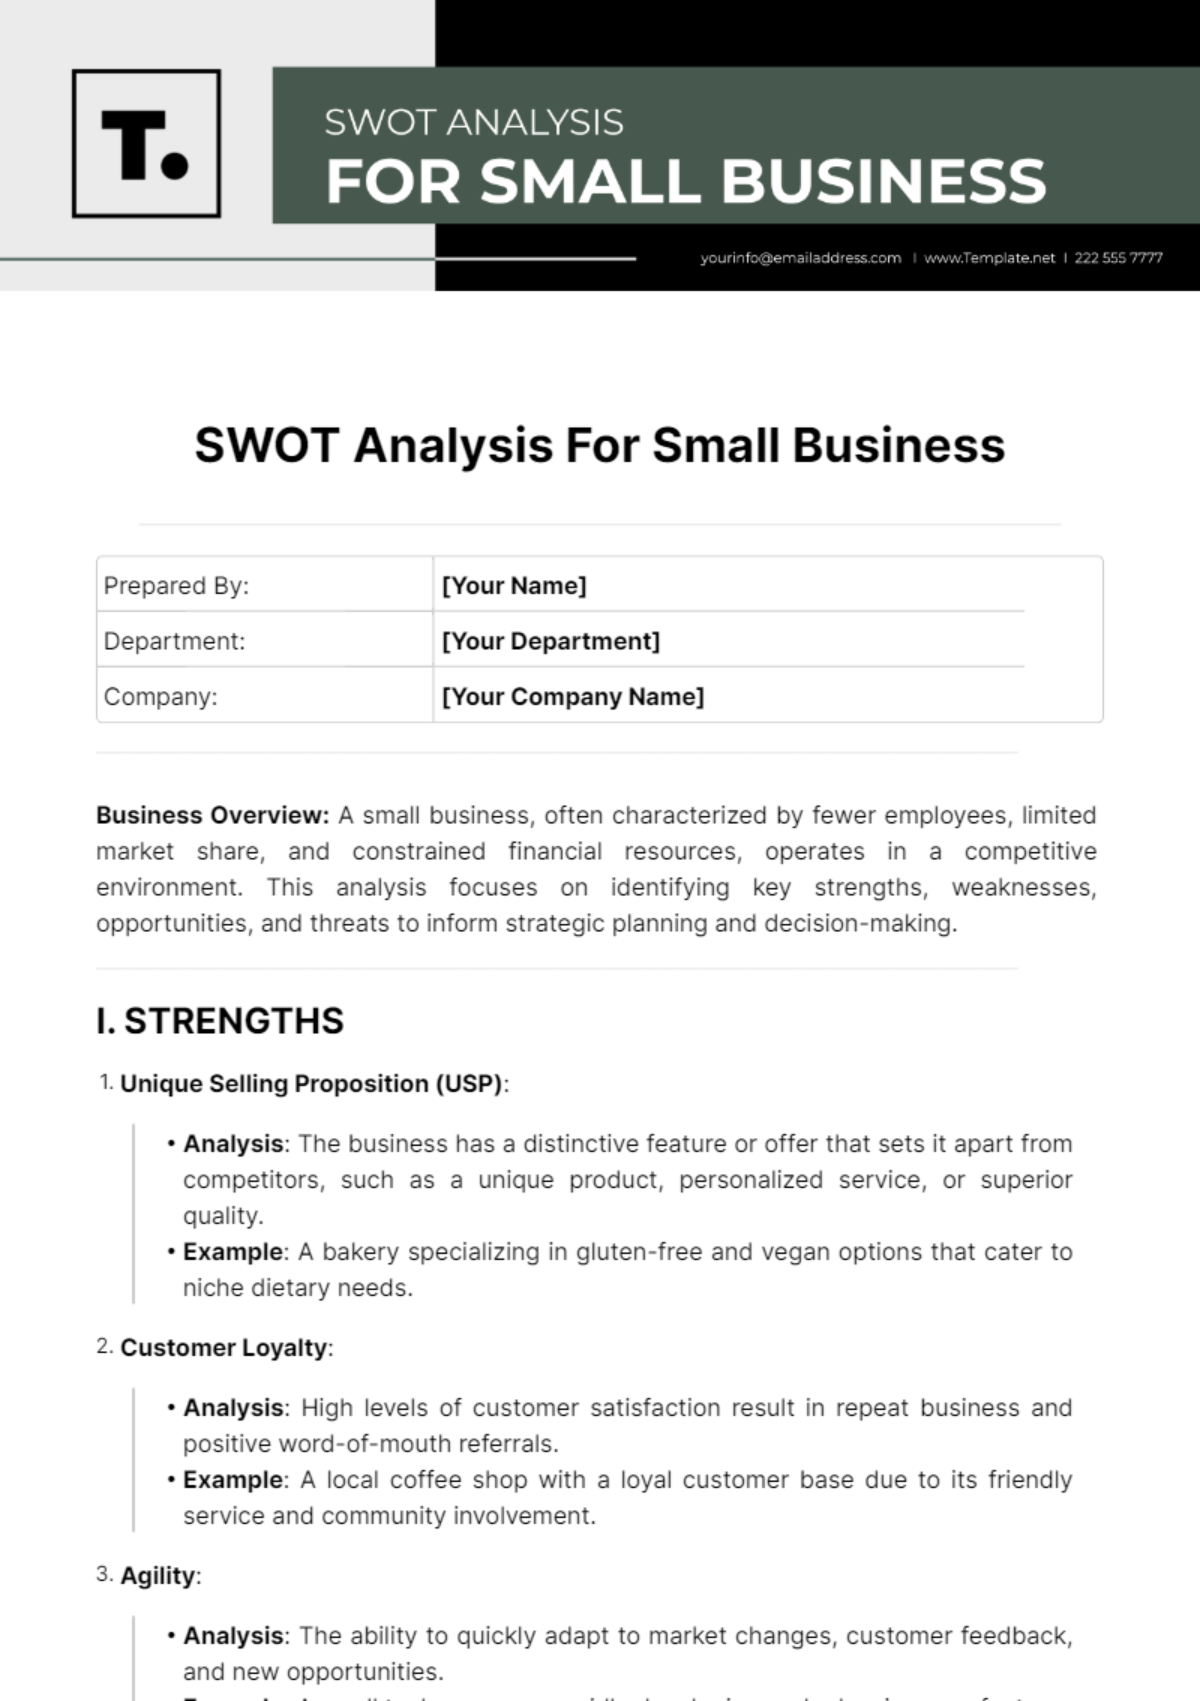 Free SWOT Analysis For Small Business Template